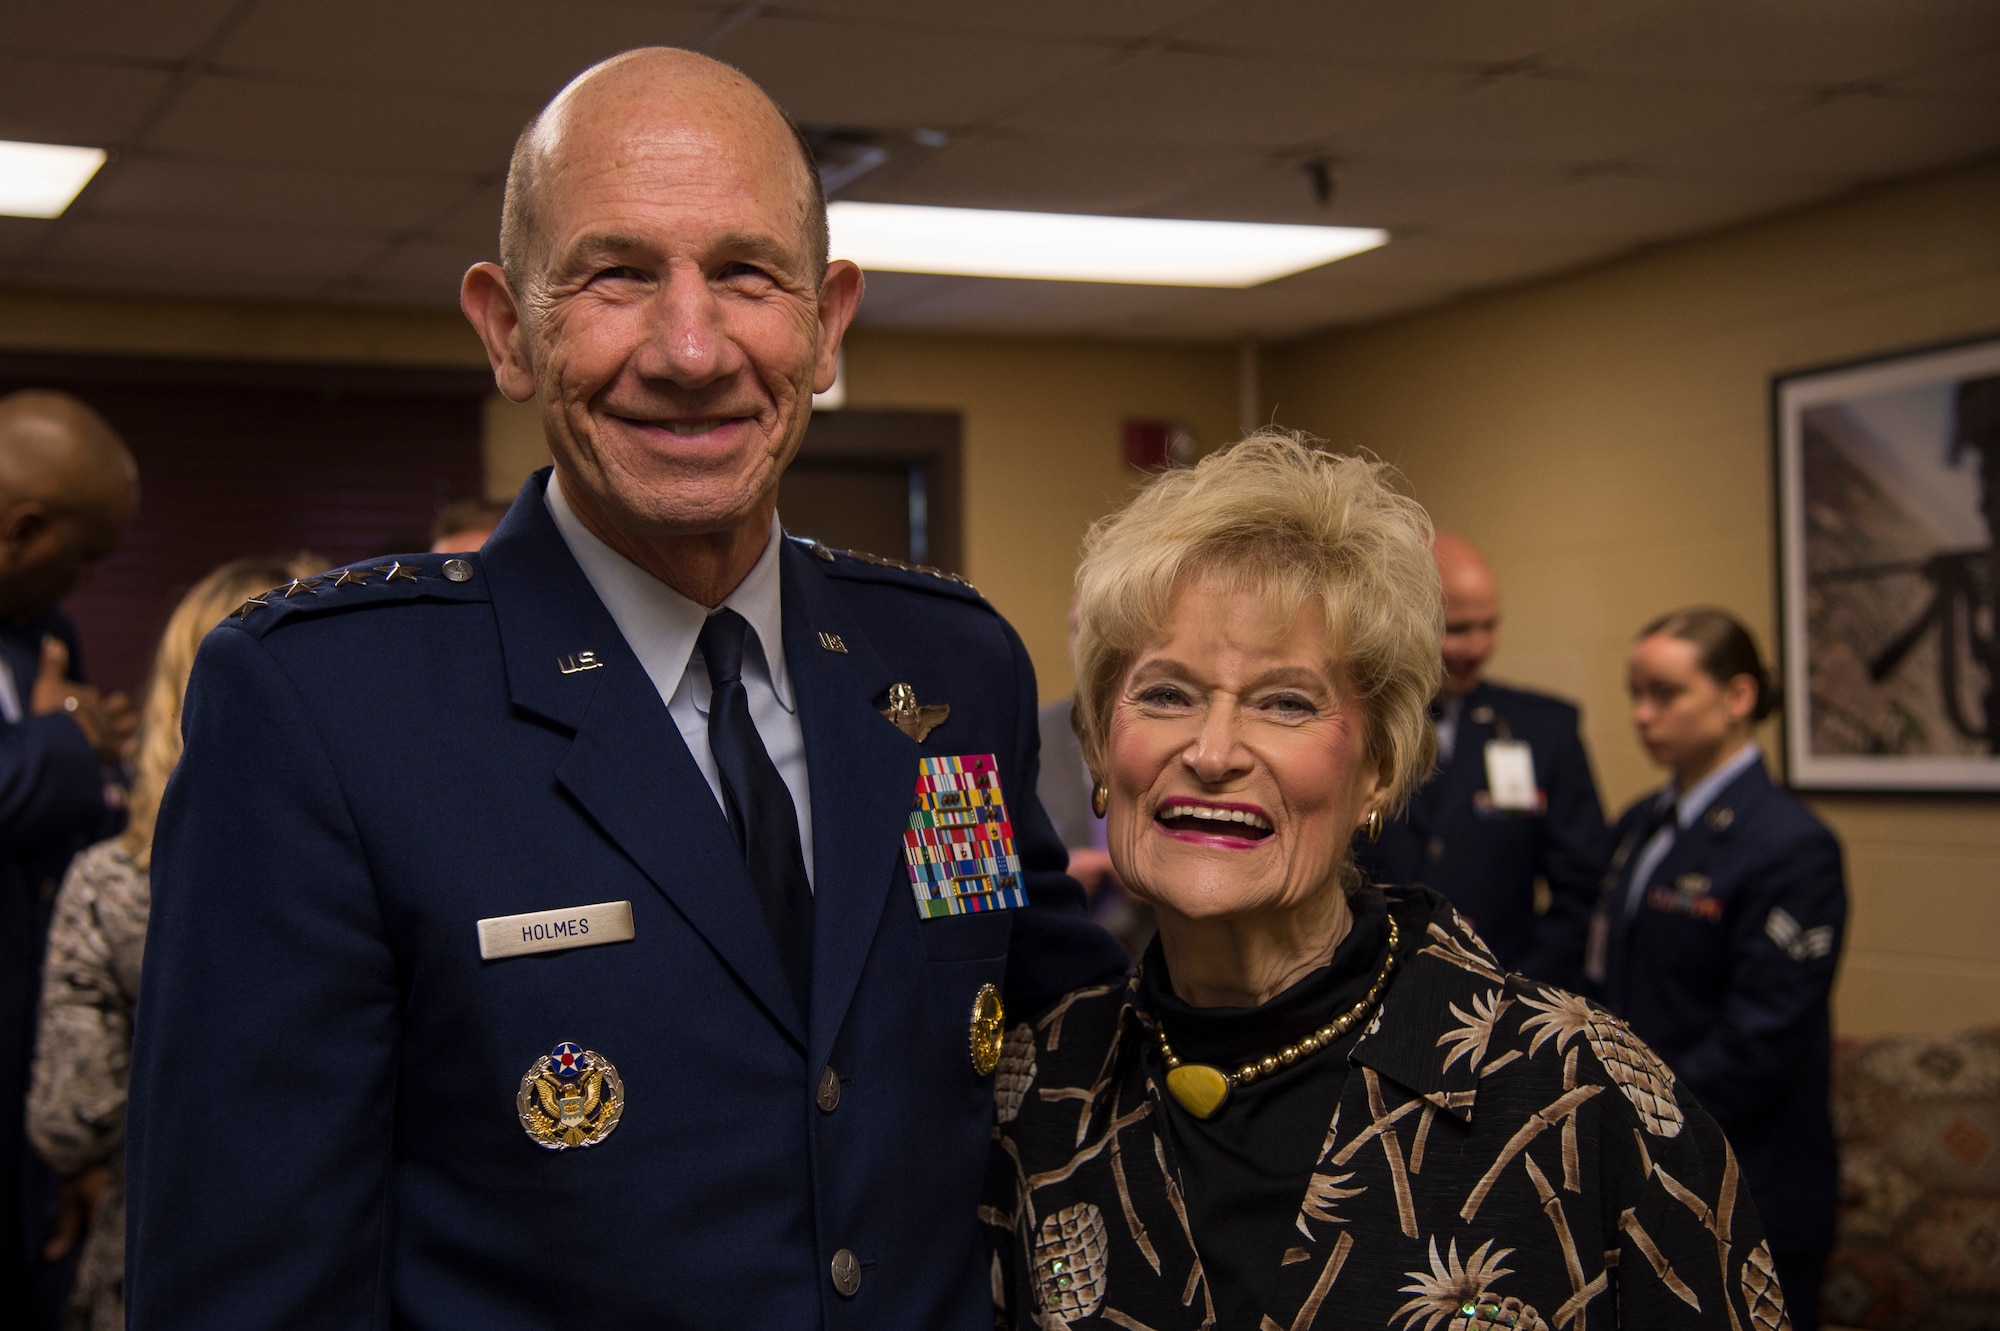 Gen. Mike Holmes, commander of Air Combat Command, poses for a photo with Dr. Lucy Greene during the Celebration of Life ceremony honoring the late Mr. W. Parker Greene, March 14, 2019, at Moody Air Force Base, Ga. Greene, a steadfast Air Force advocate and one of the most influential military civic leaders passed away Dec. 18, 2018. (U.S. Air Force Photo by Andrea Jenkins)